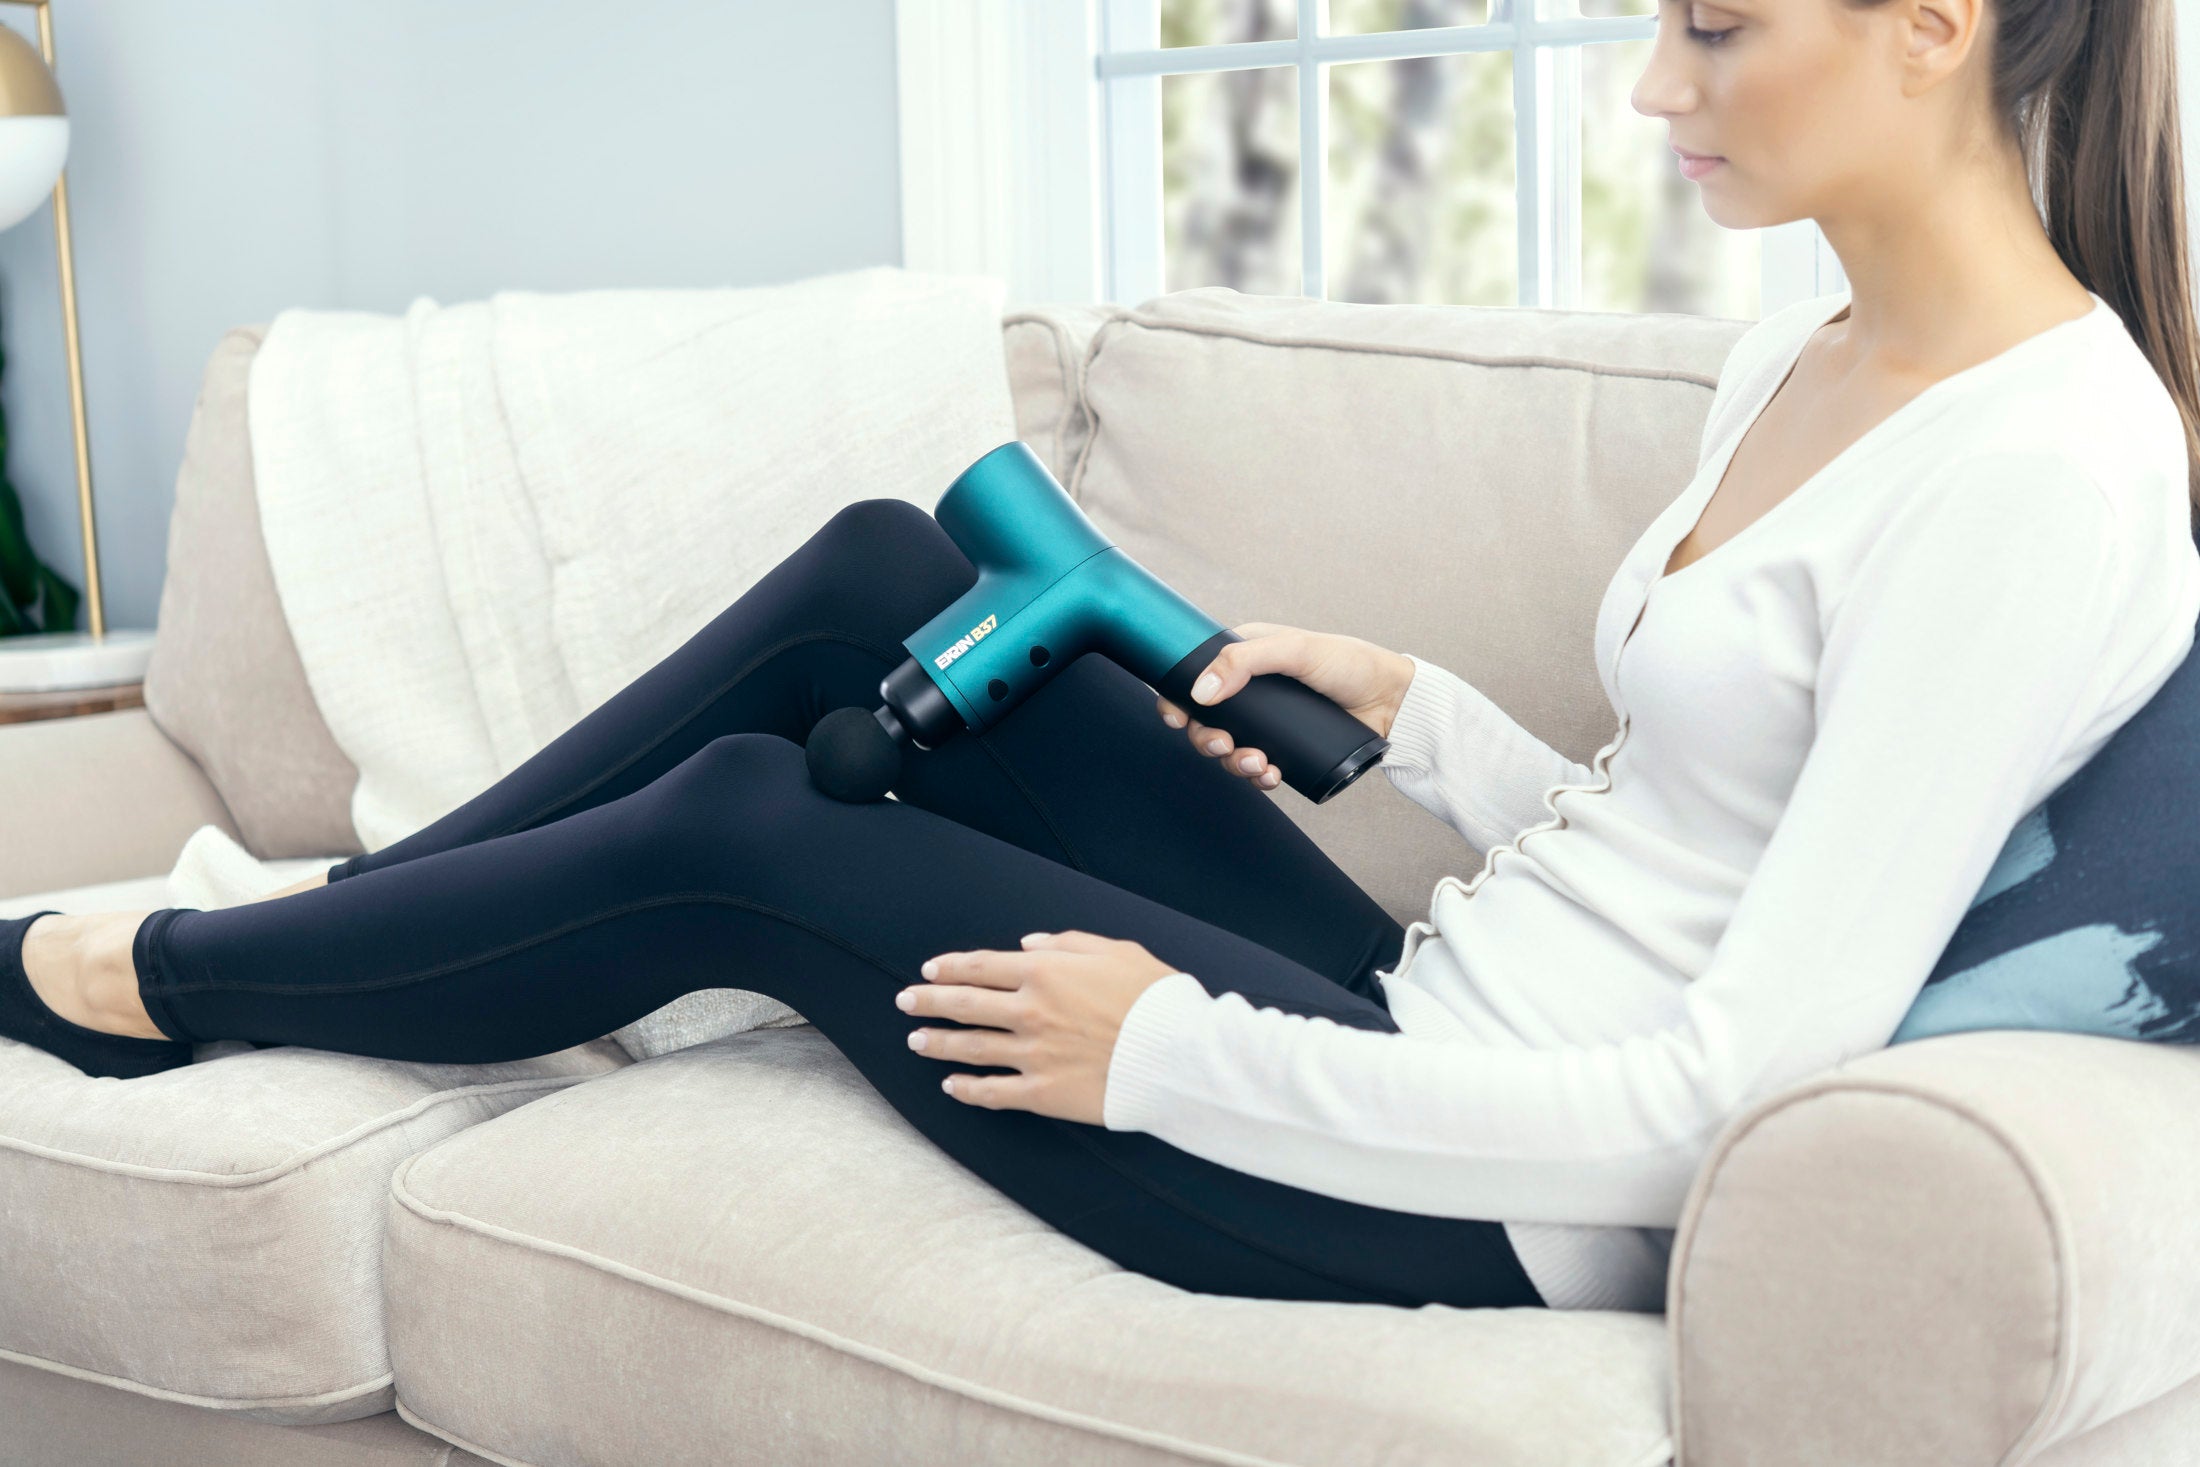 Athletic woman using Ekrin B37 massage gun on a white couch